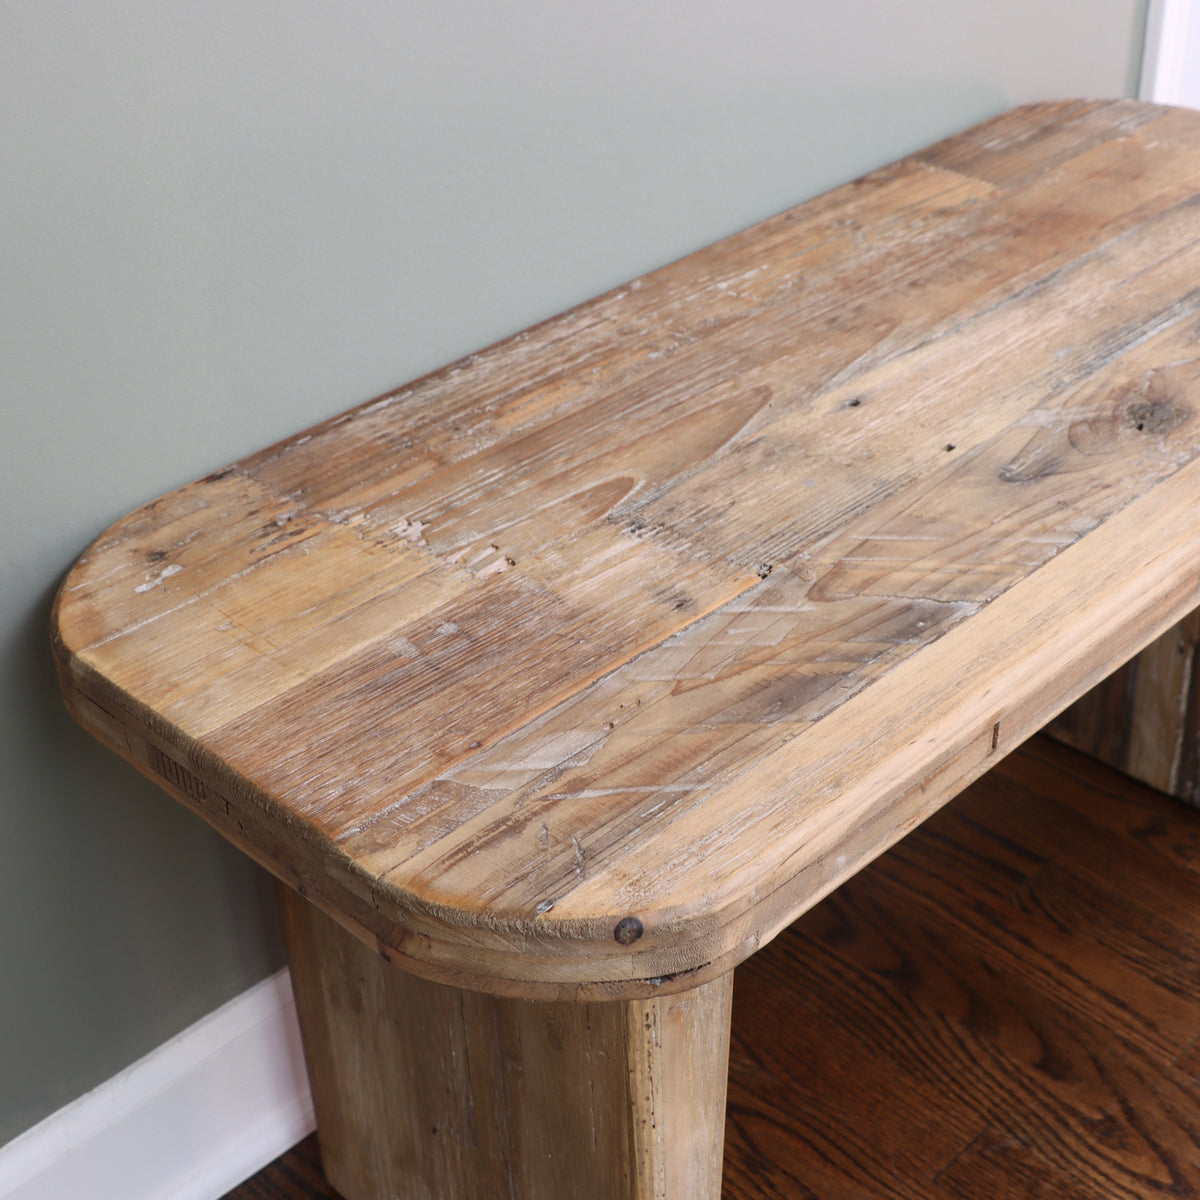 Ember Recycled Wooden Bench - Holistic Habitat 